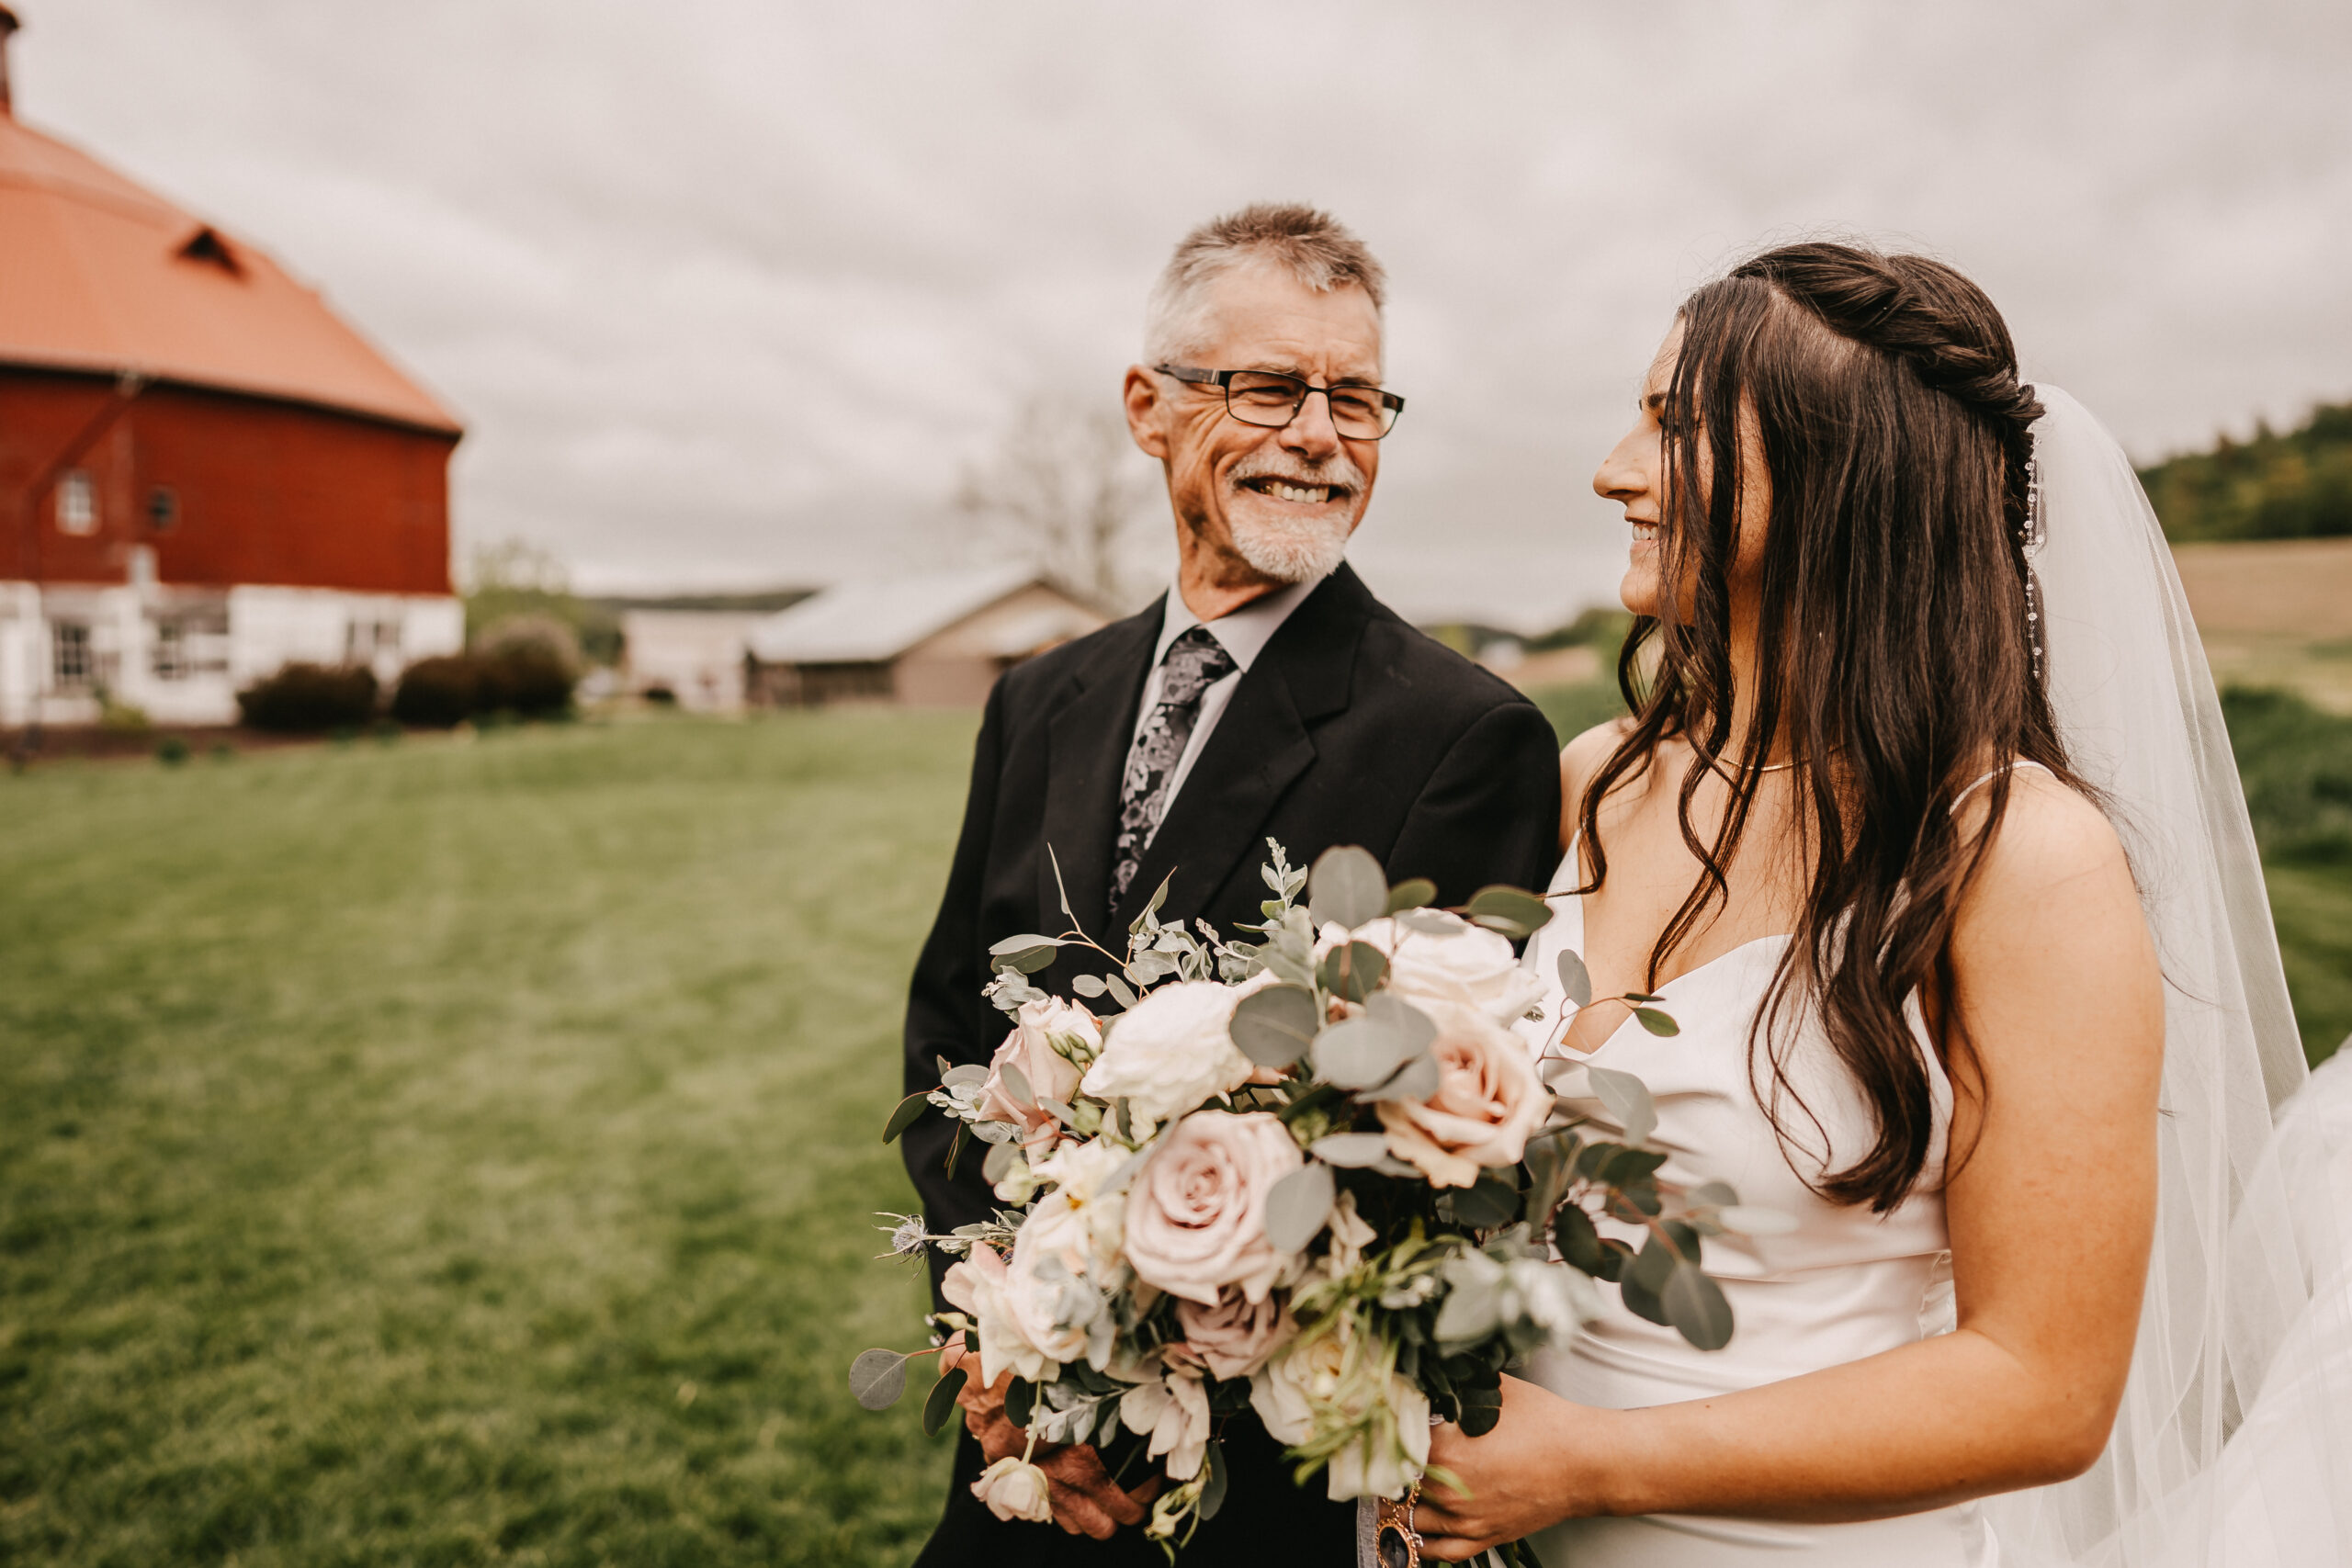 Bride and Dad, Walking Down The Aisle, Minnesota Wedding Photographer, Minnesota Photographer, Minnesota Wedding, Hidden Meadow & Barn, Hidden Meadow Barn, Hidden Meadow Barn Wedding, Wisconsin Wedding, Pepin Wedding, Wedding Inspiration, Wedding Ideas, Wedding Photos, Wedding Photography, Outdoor Wedding, Summer Wedding,  Unique Wedding Photos, Fun Wedding Photos, Wedding Inspo, Rustic Wedding